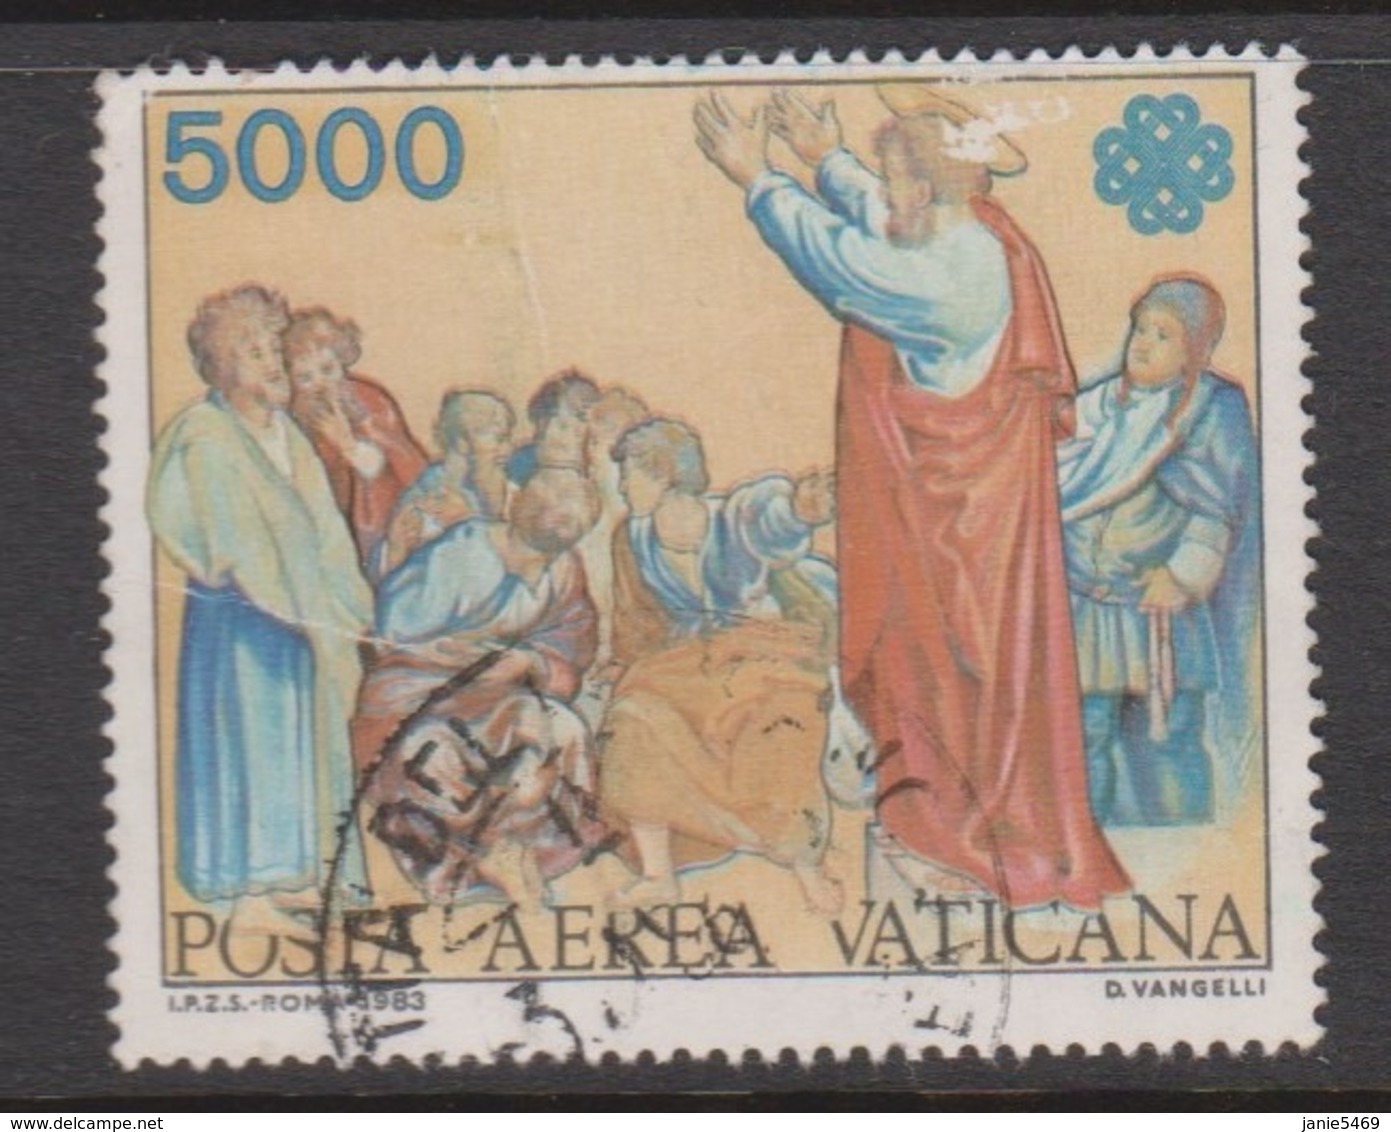 Vatican City AP 76 1983 Communications World Year .5000 Lire,used - Used Stamps